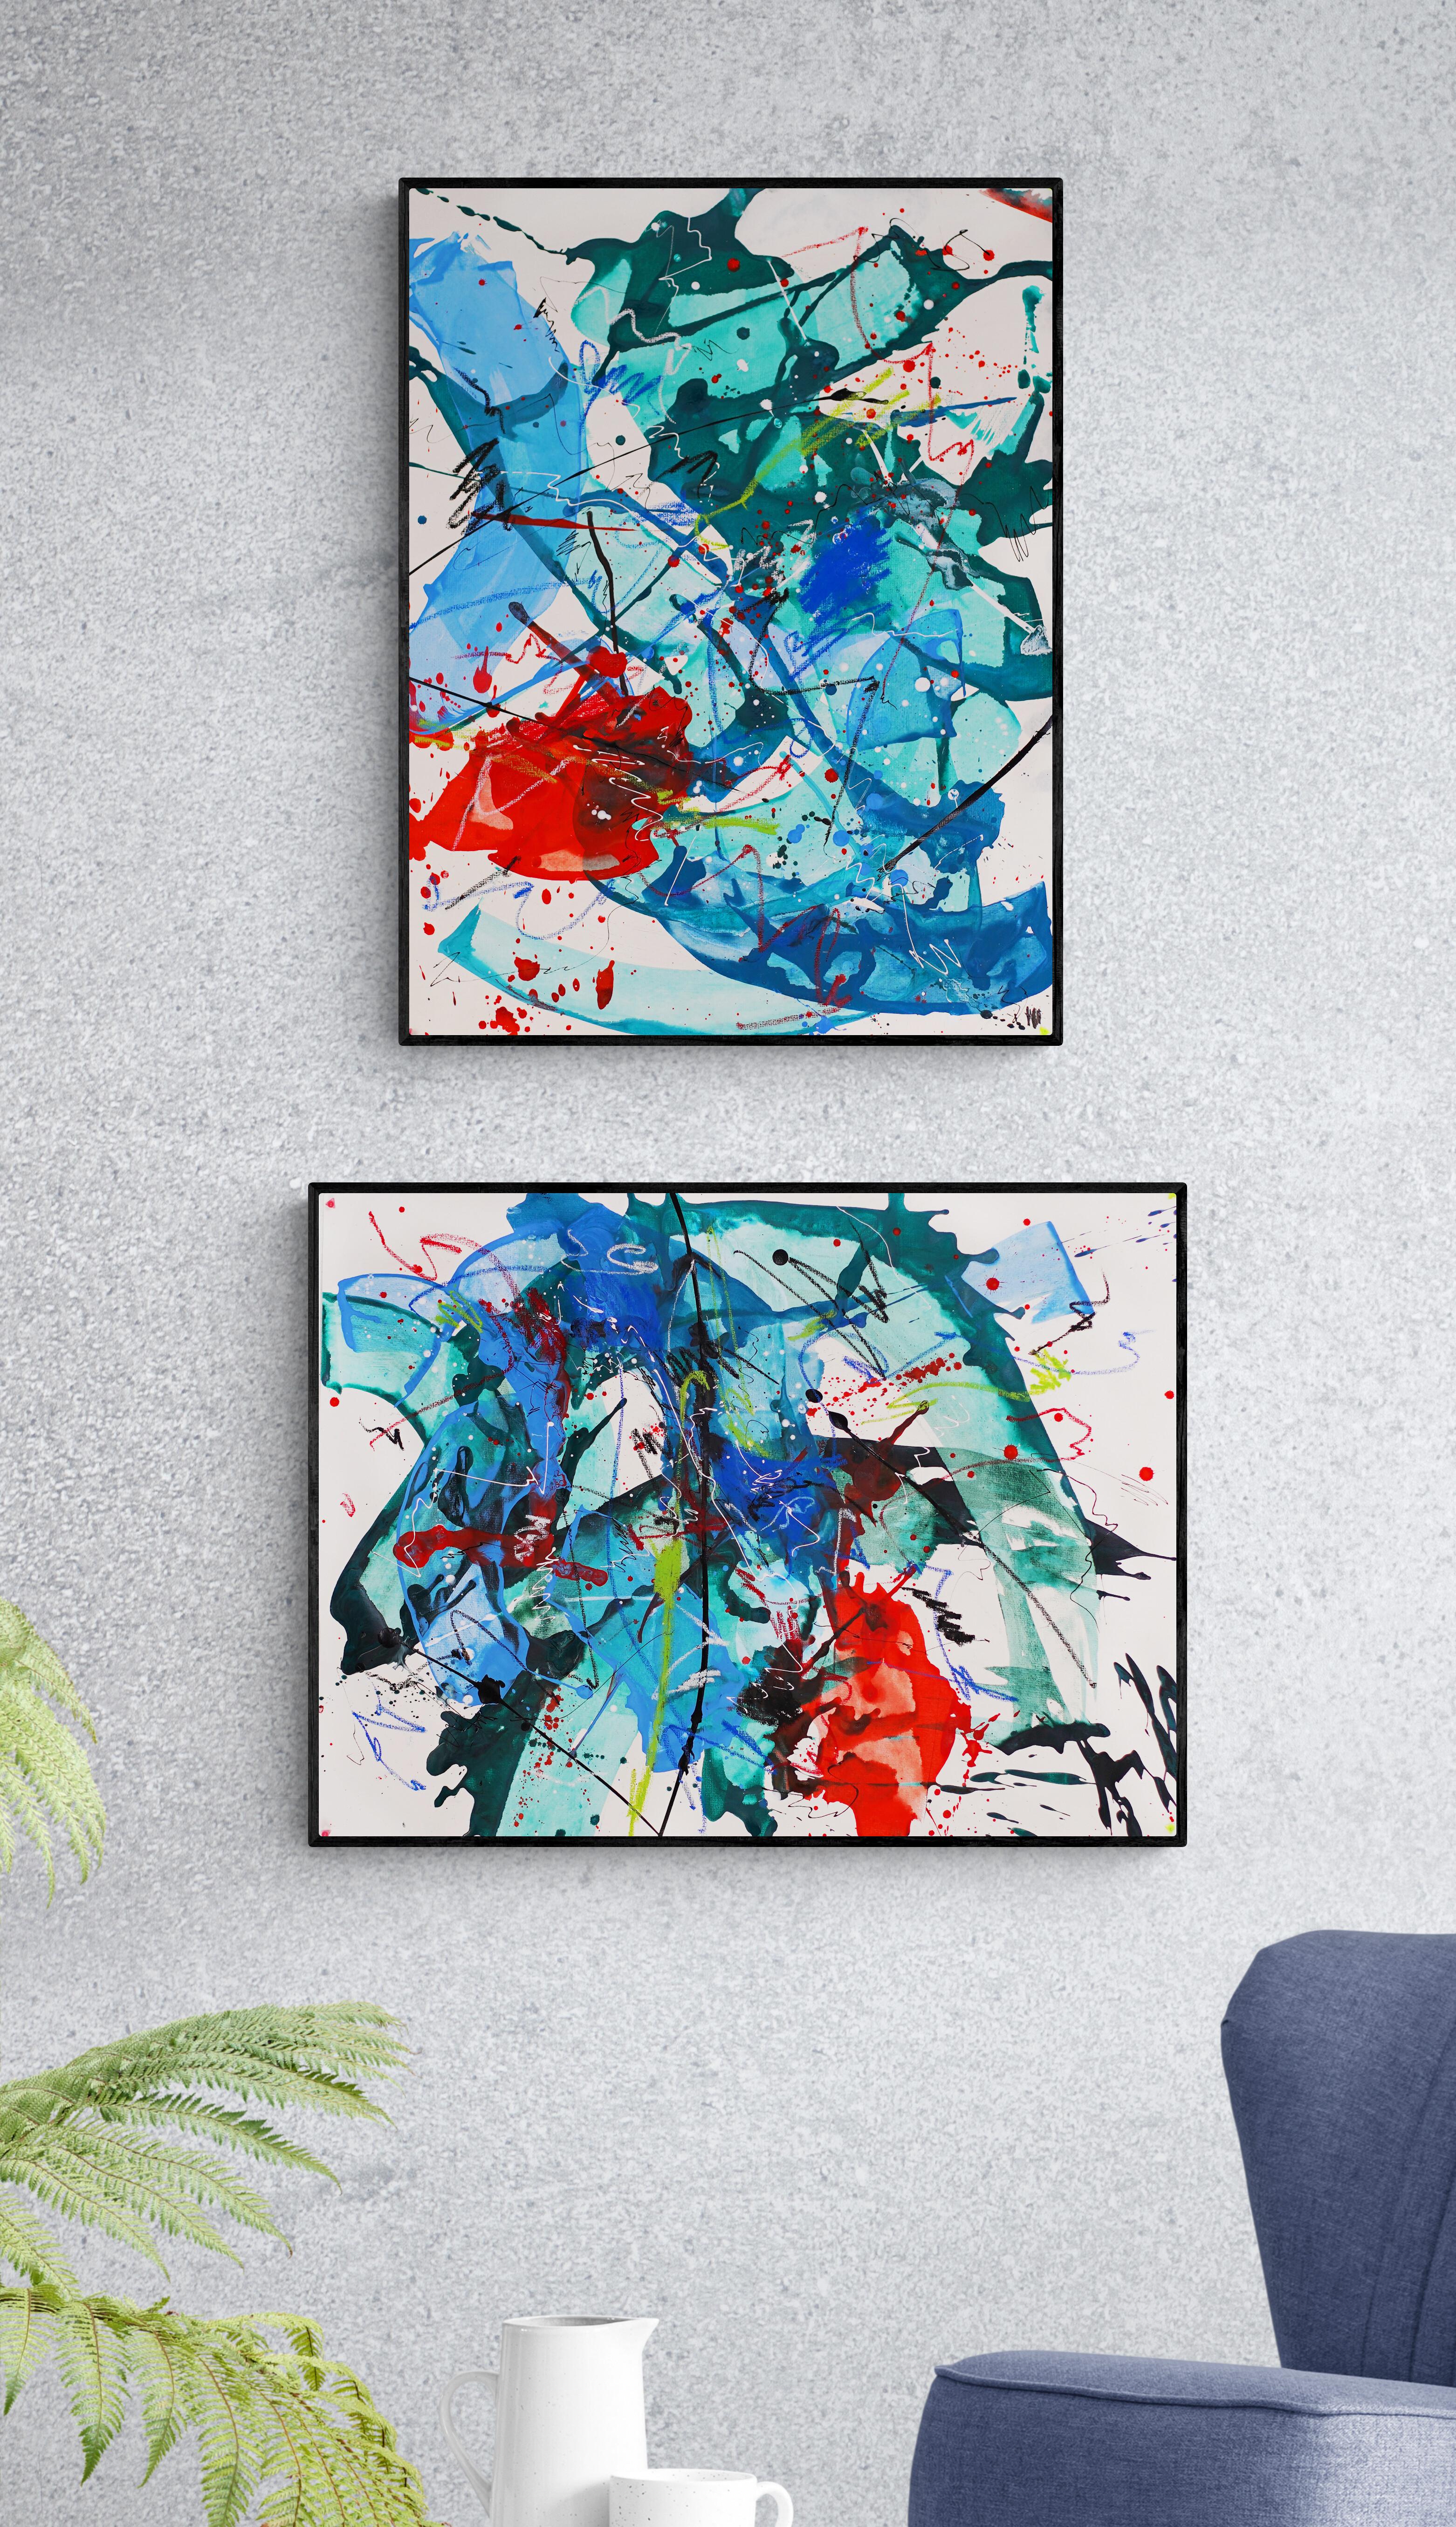 Diptych" Change 1 and change 2" , 60x80 cm/ 60x80cm